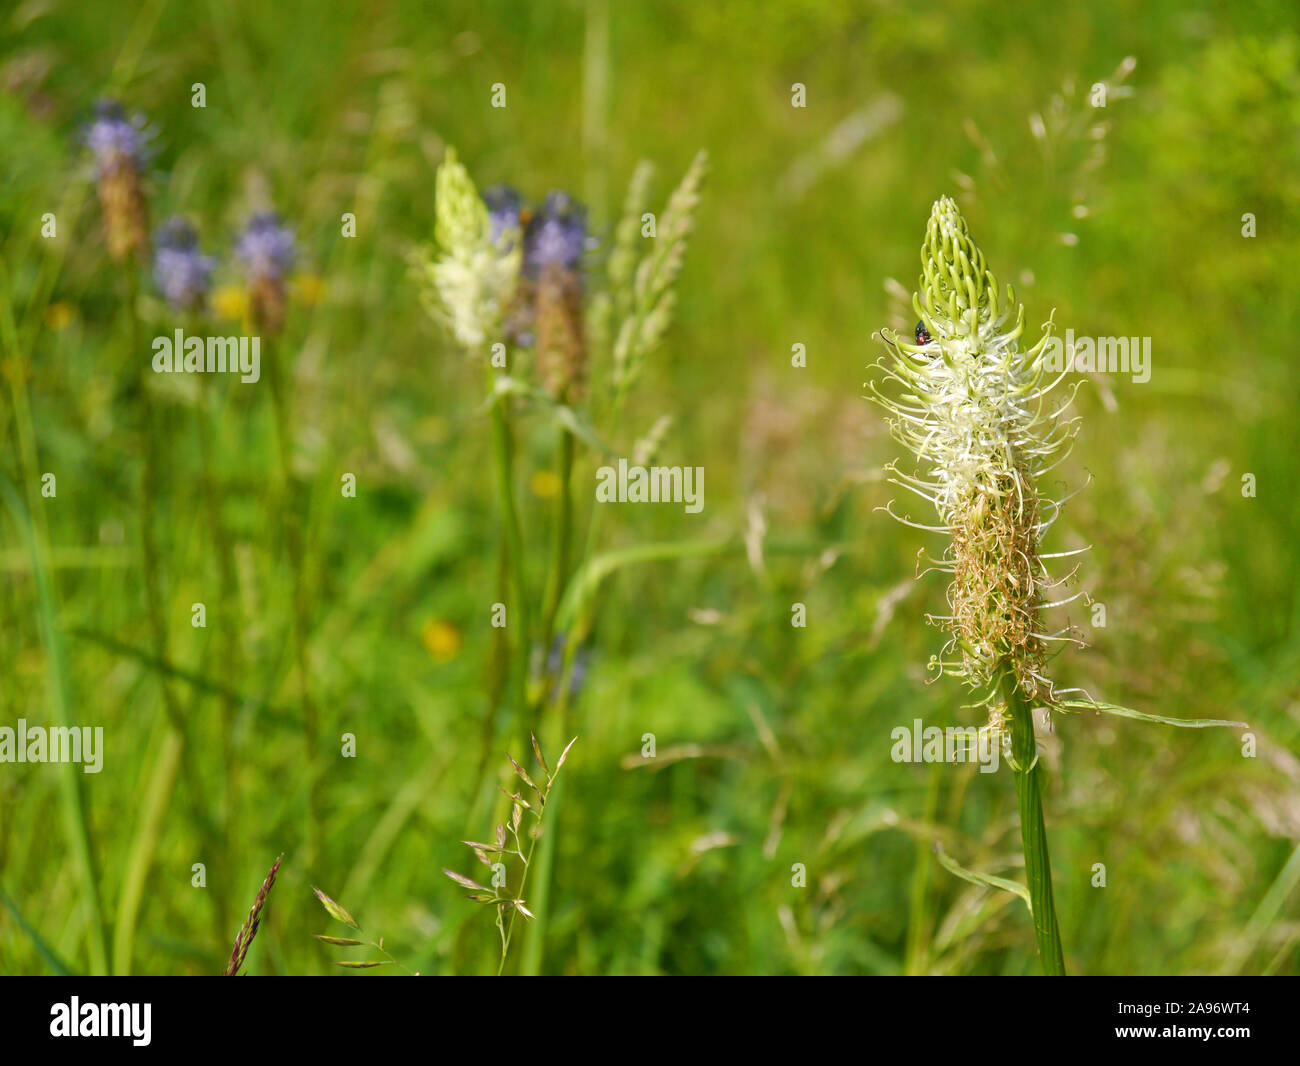 spiked rampion, Phyteuma spicatum with white and blue colors Stock Photo